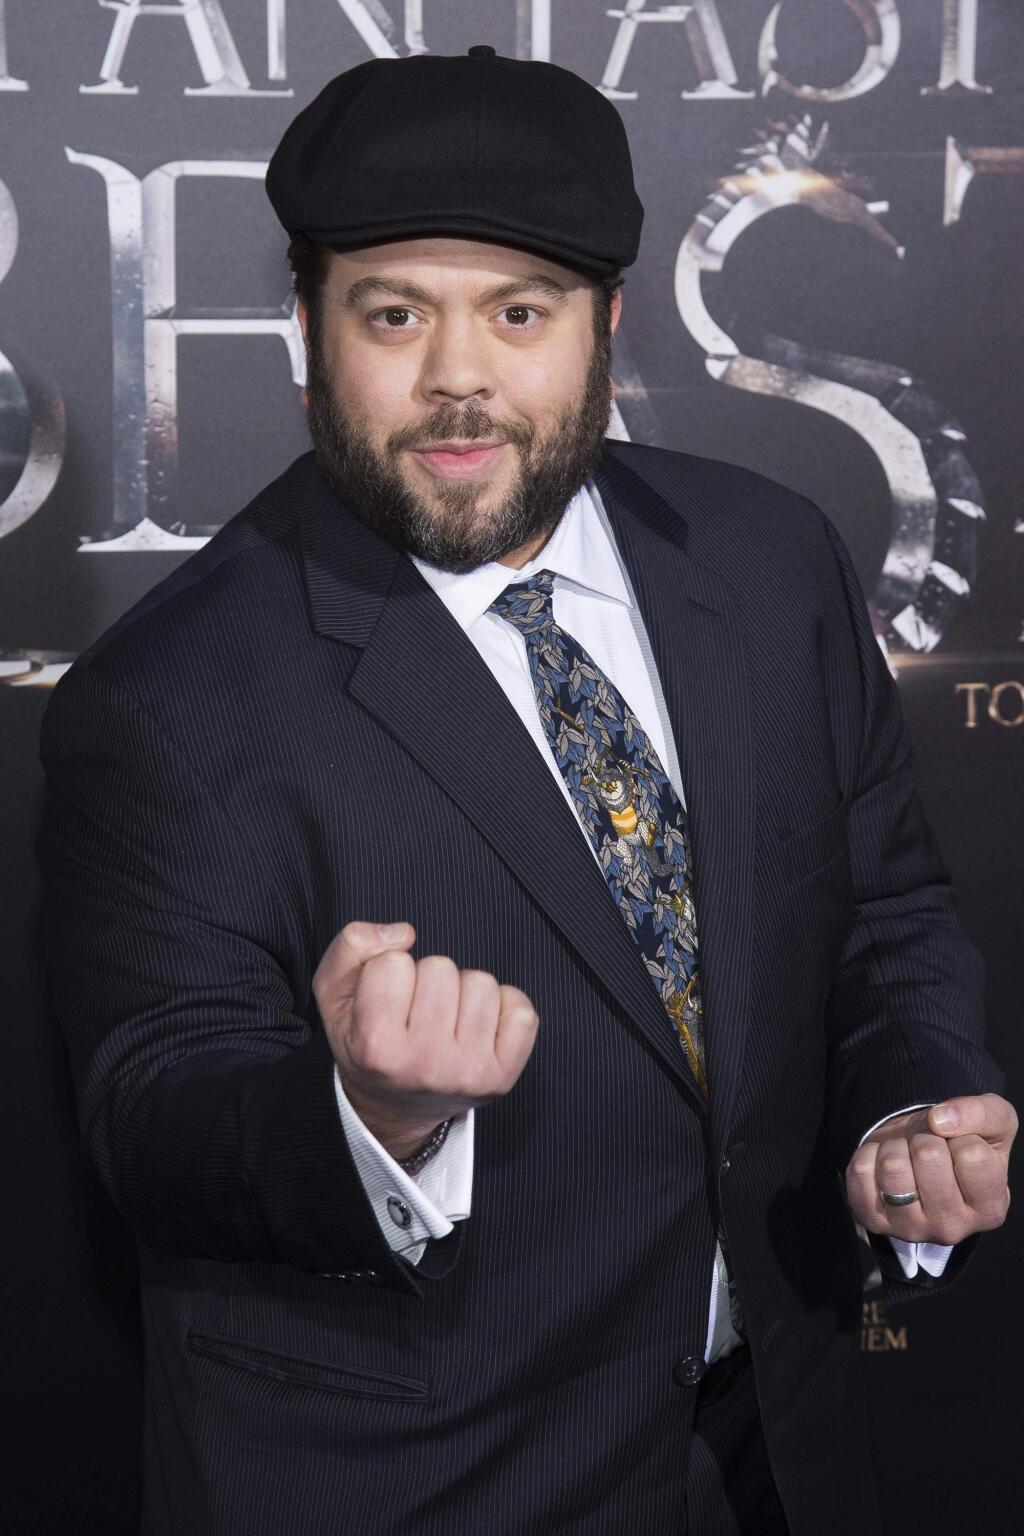 Dan Fogler attends the world premiere of 'Fantastic Beasts and Where To Find Them' at Alice Tully Hall on Thursday, Nov. 10, 2016, in New York. (Photo by Charles Sykes/Invision/AP)